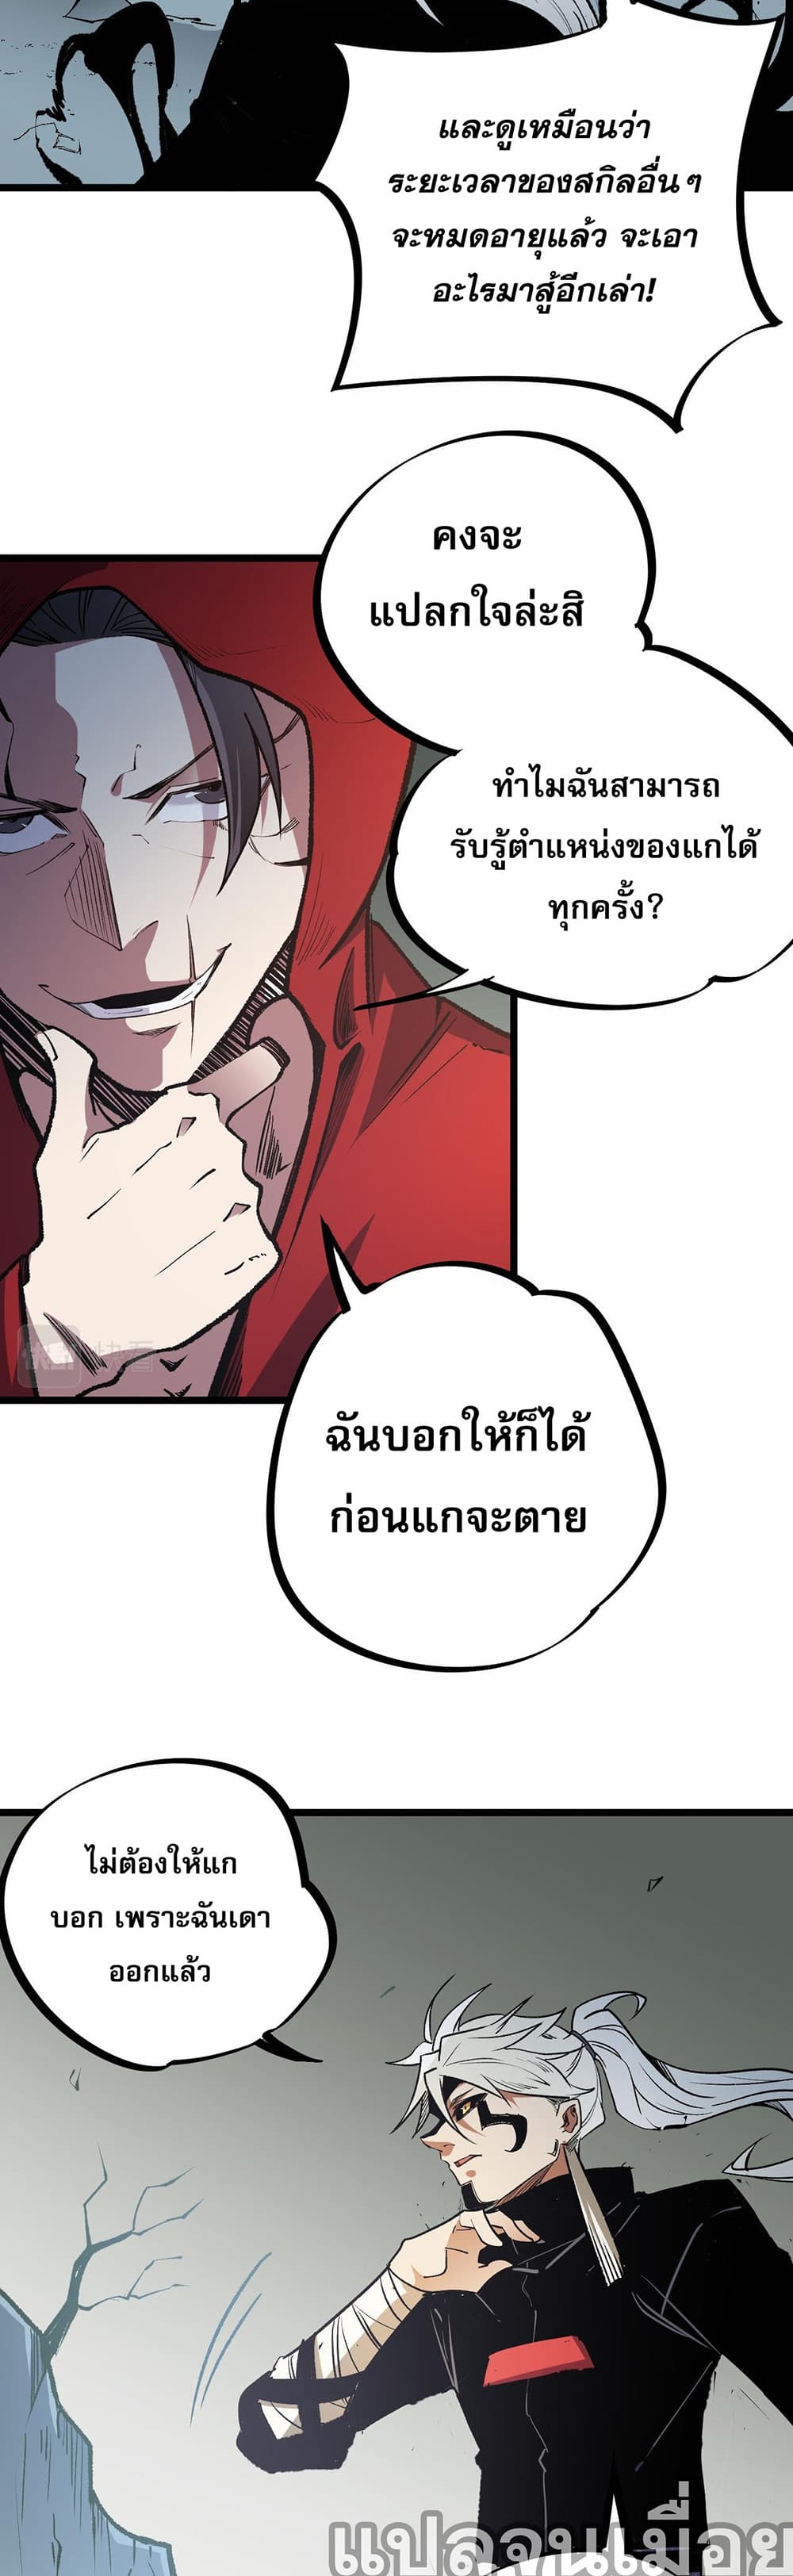 Job Changing for the Entire Population: The Jobless Me Will Terminate the Gods ฉันคือผู้เล่นไร้อาชีพที่สังหารเหล่าเทพ 43-43